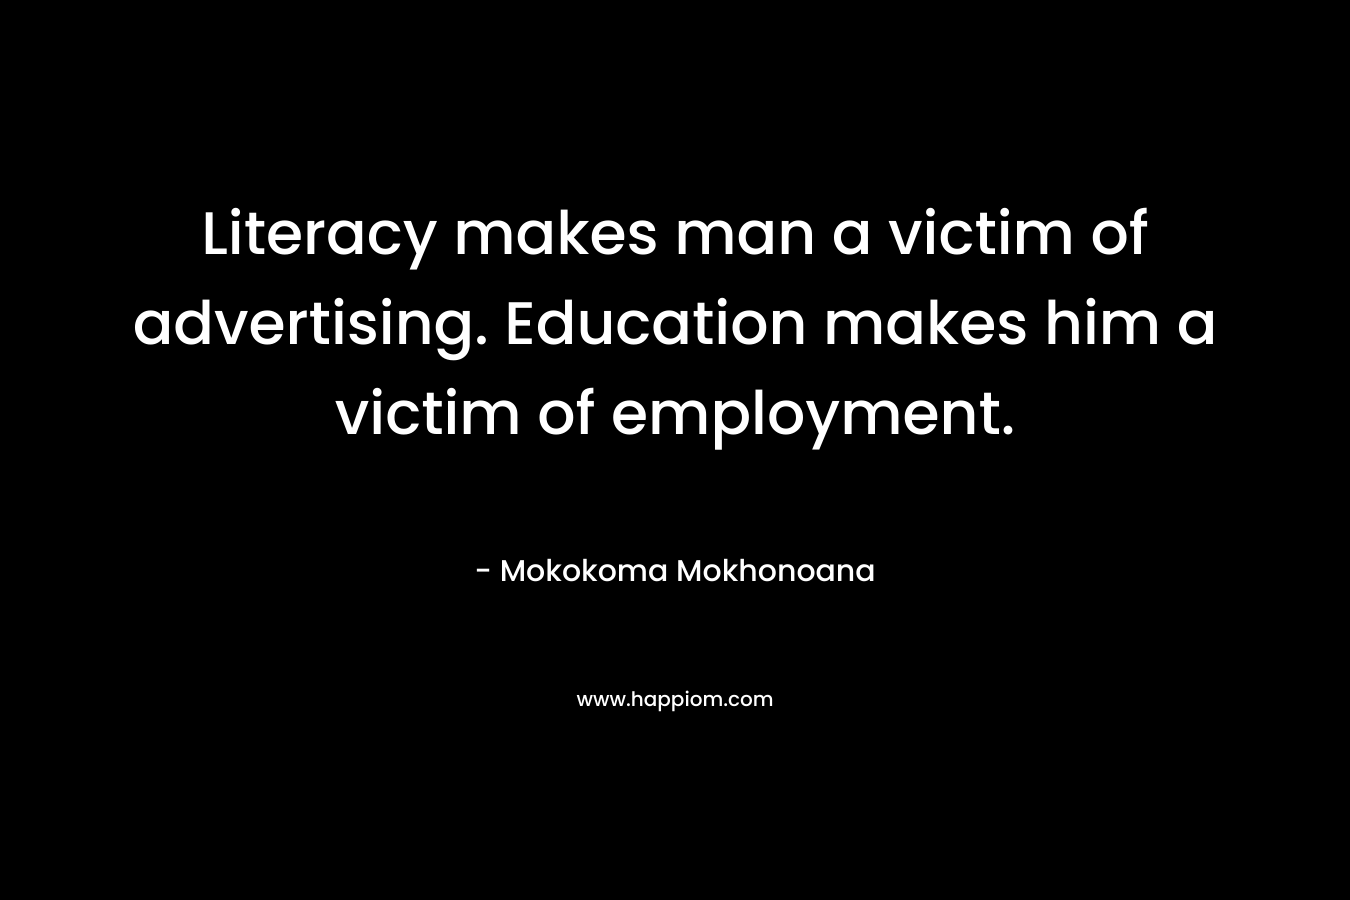 Literacy makes man a victim of advertising. Education makes him a victim of employment.